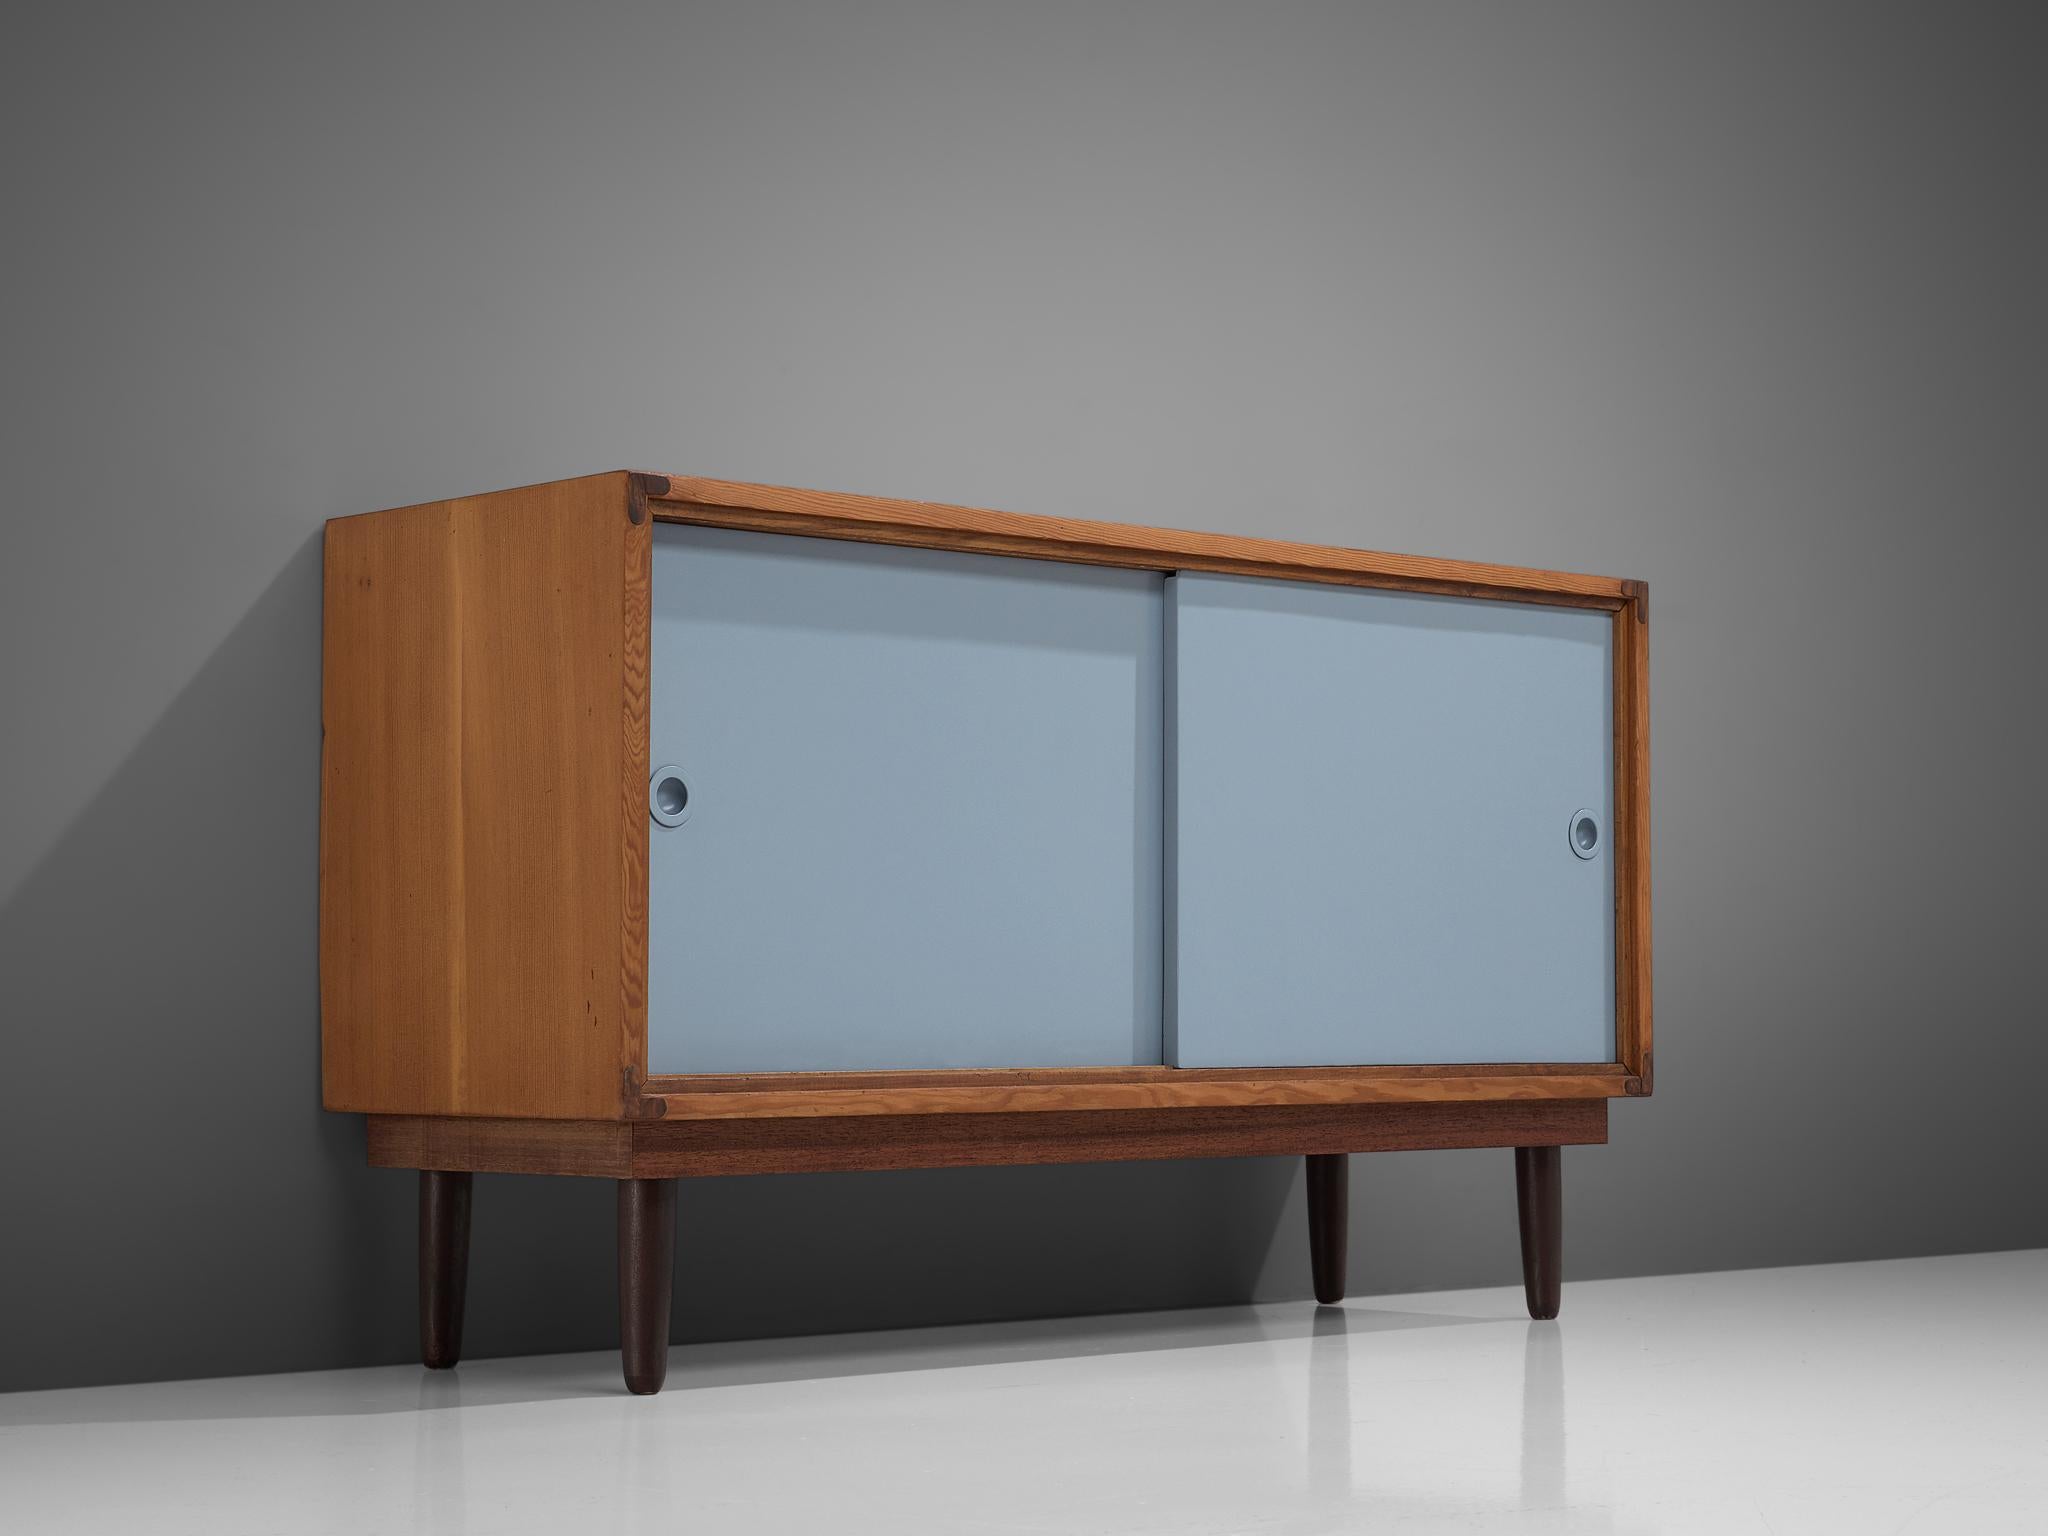 Cabinets, pine, Denmark, 1950s

This cabinet is an elegant and well-proportioned piece within a simplistic construction that allows it to fit seamlessly into any interior. The slightly tapered round legs lift the rectangular shaped corpus up,